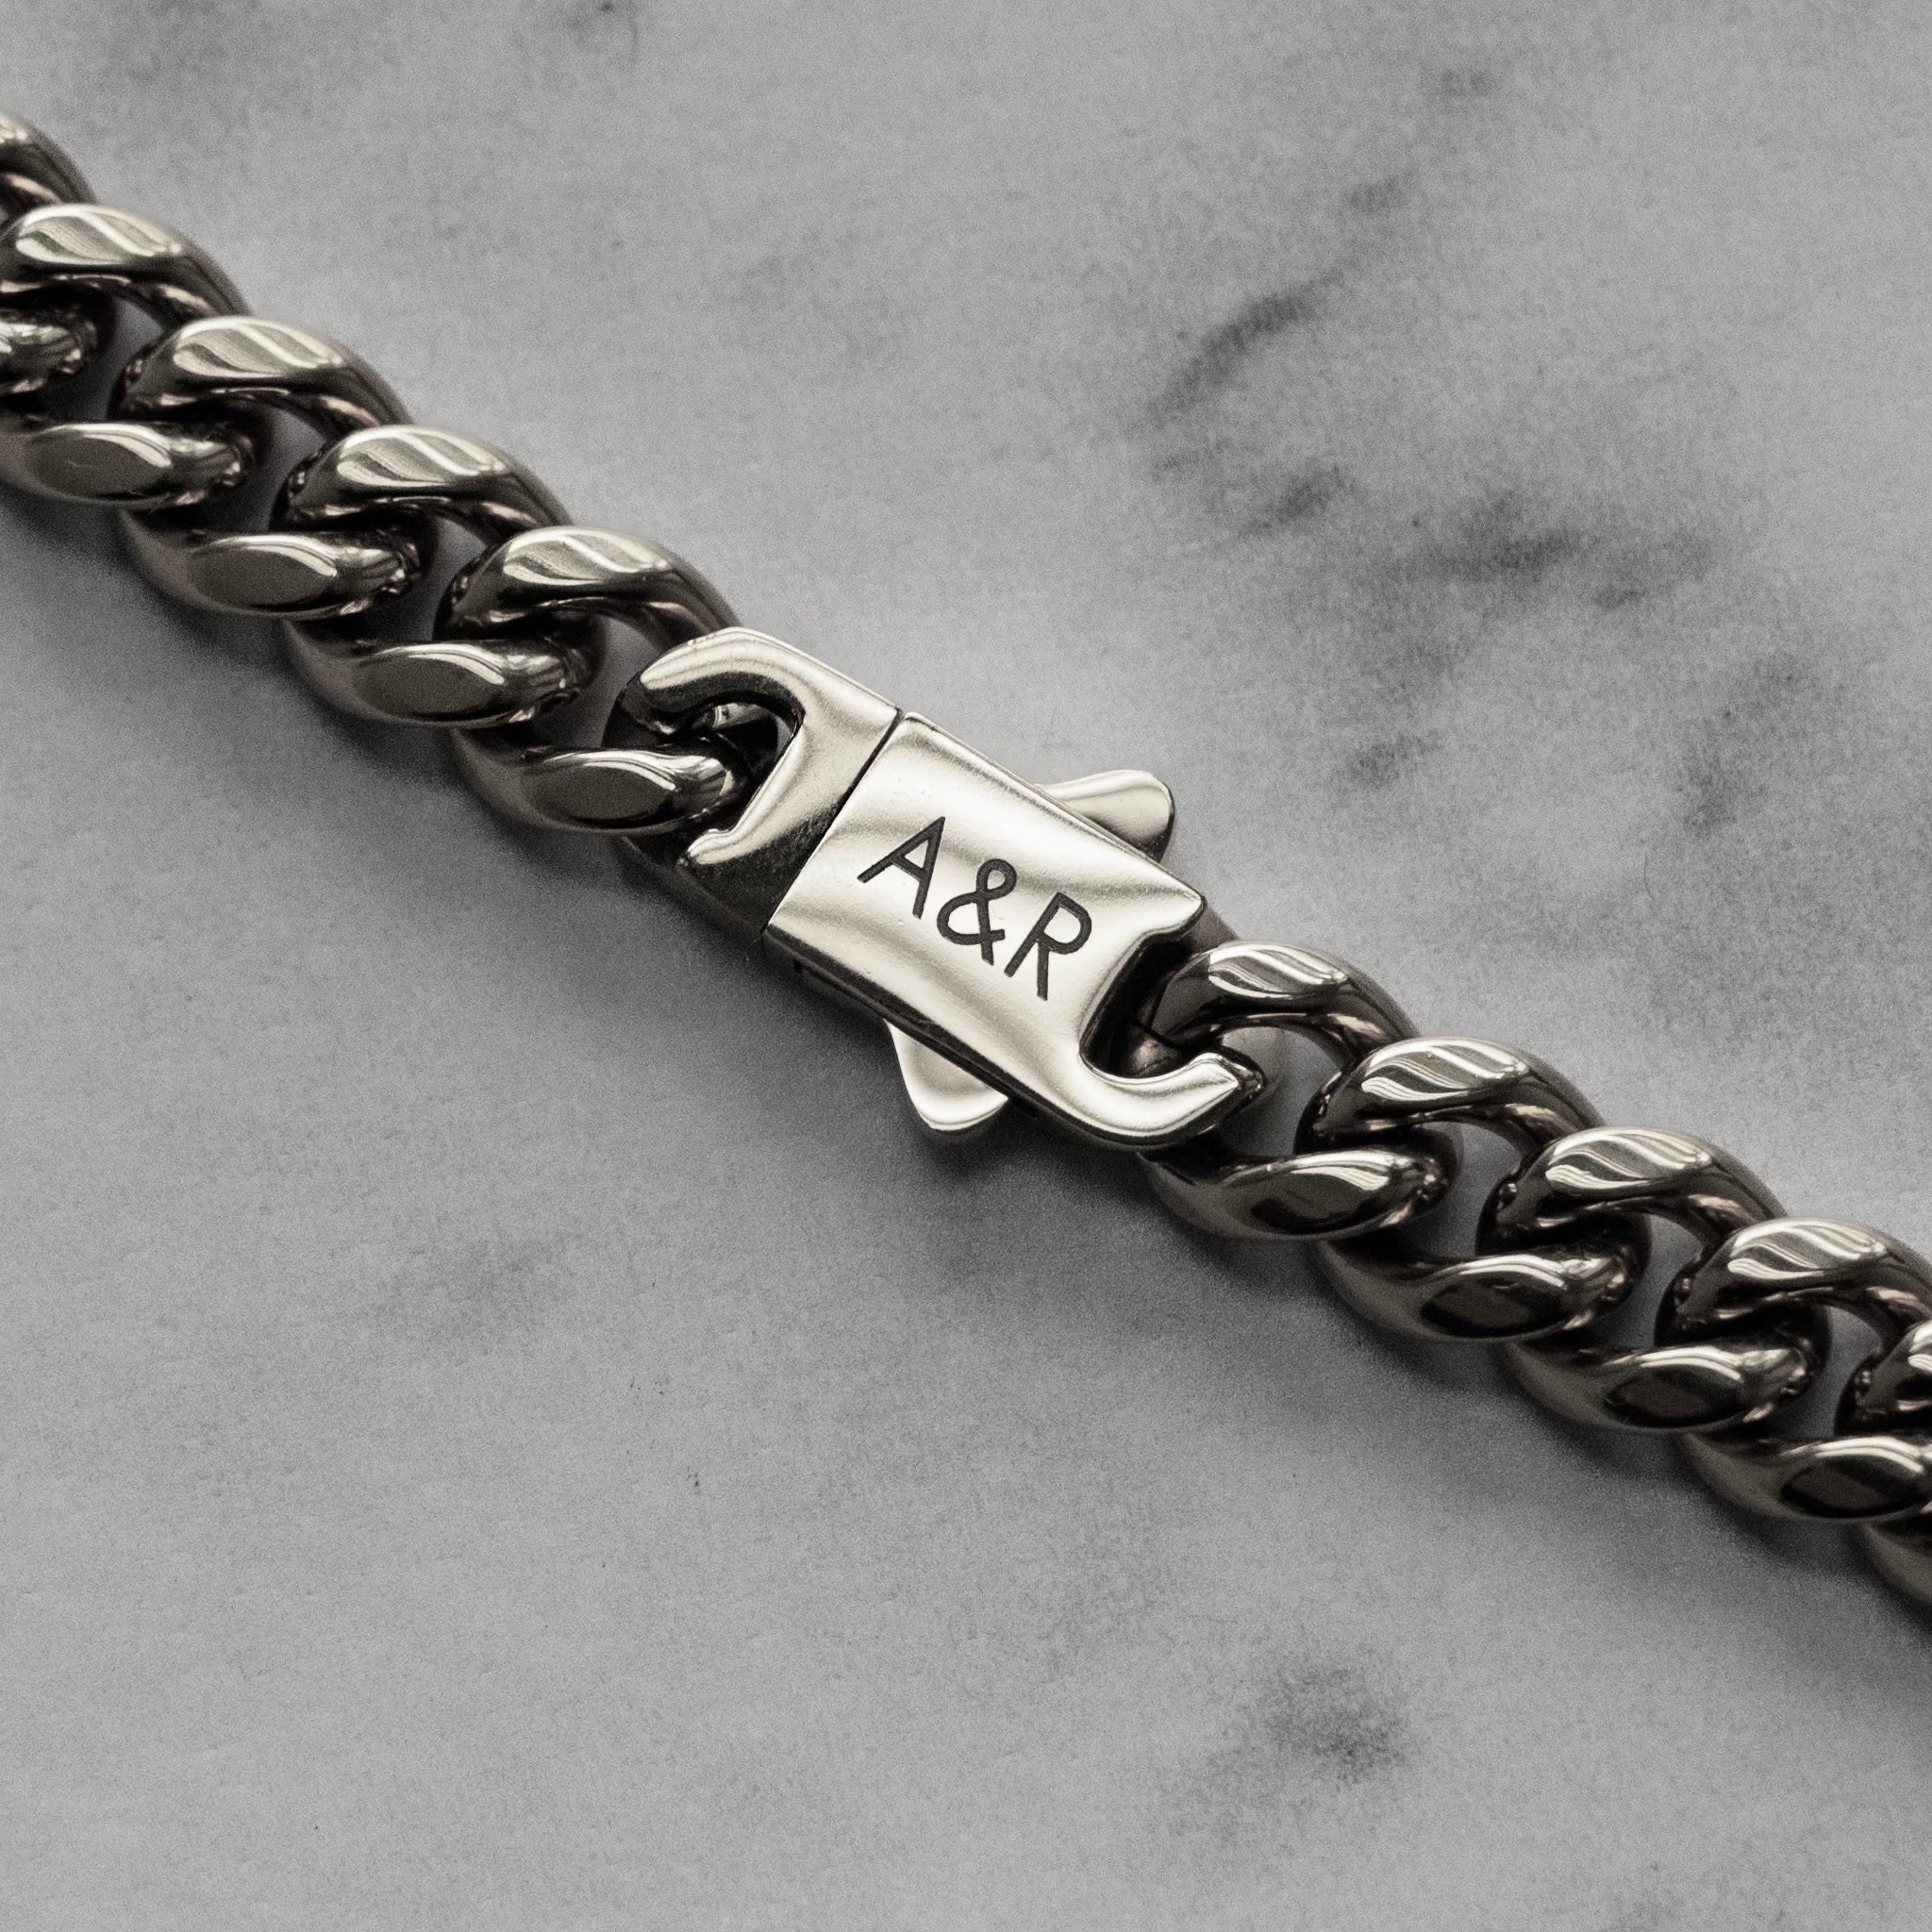 Stainless Steel Cuban Link Chain with Engraving.